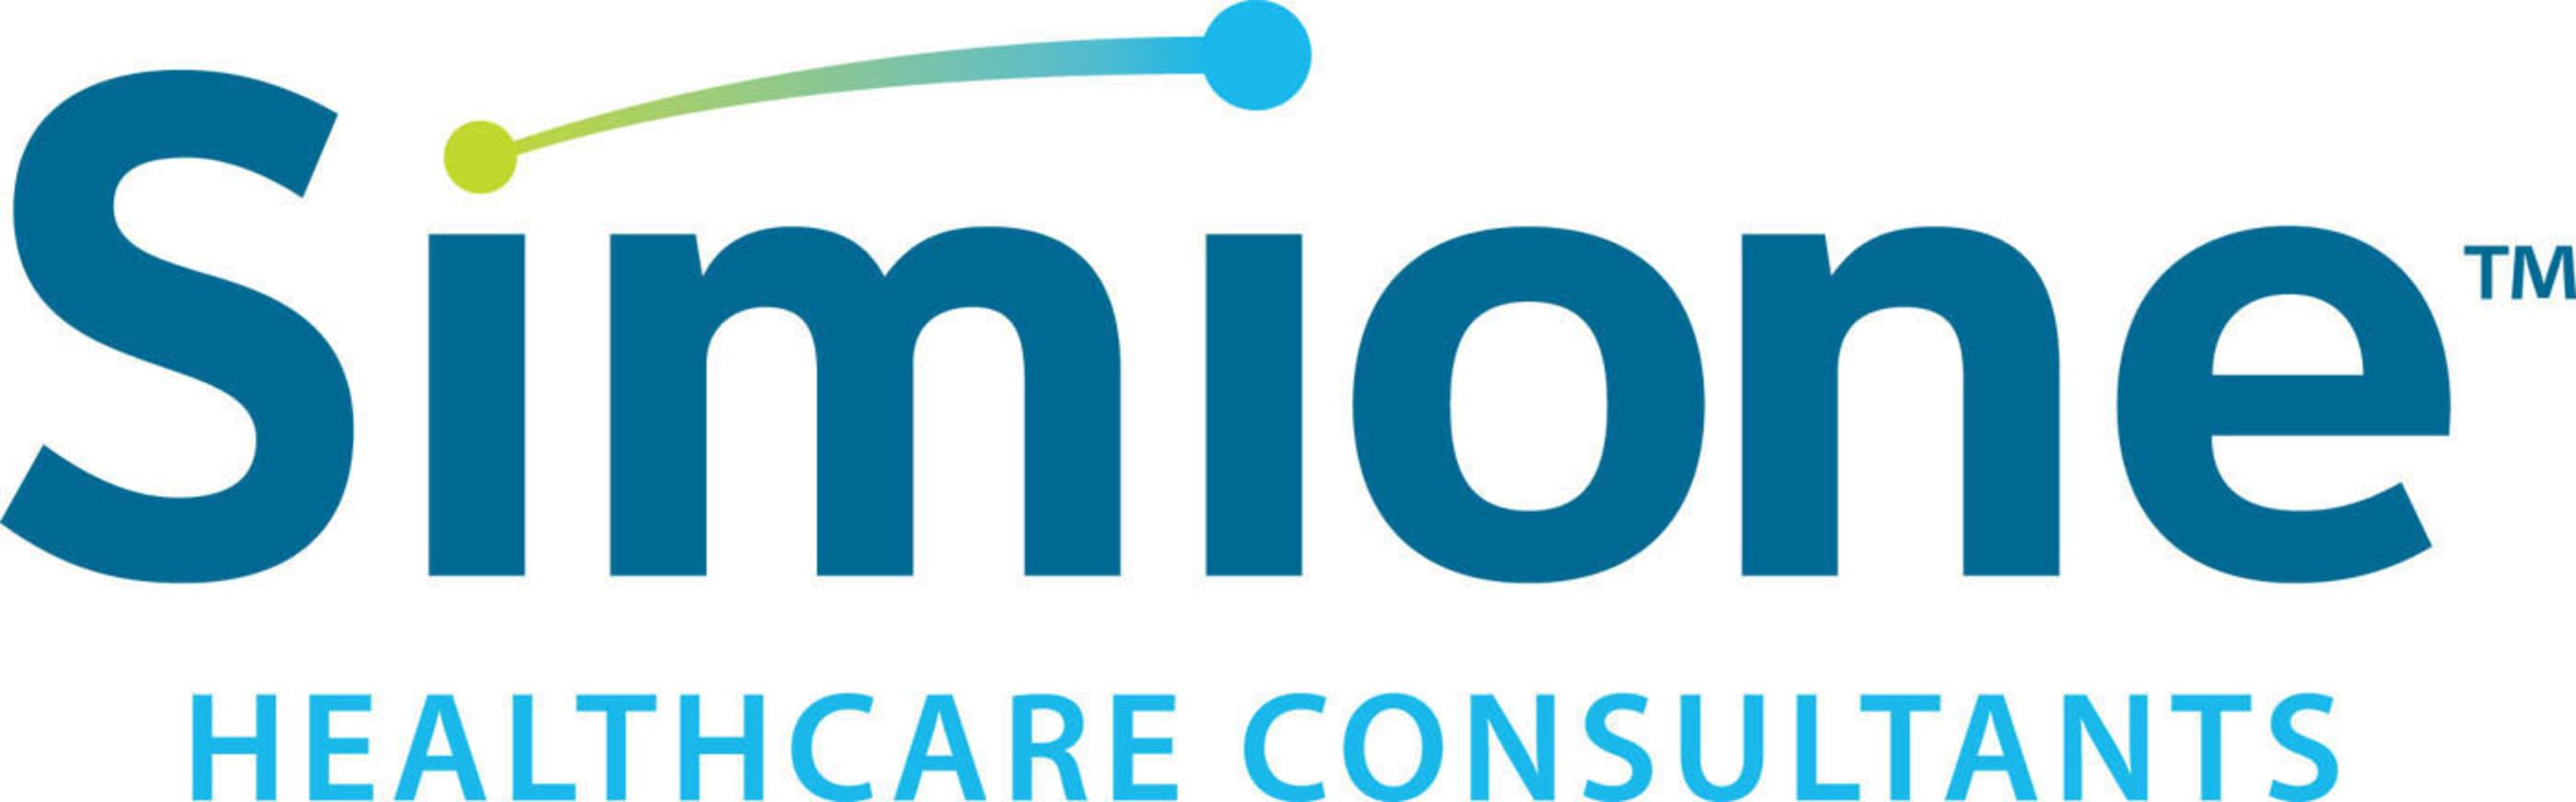 Simione Healthcare Consultants Provides Healthy Business Solutions for Home Care and Hospice.